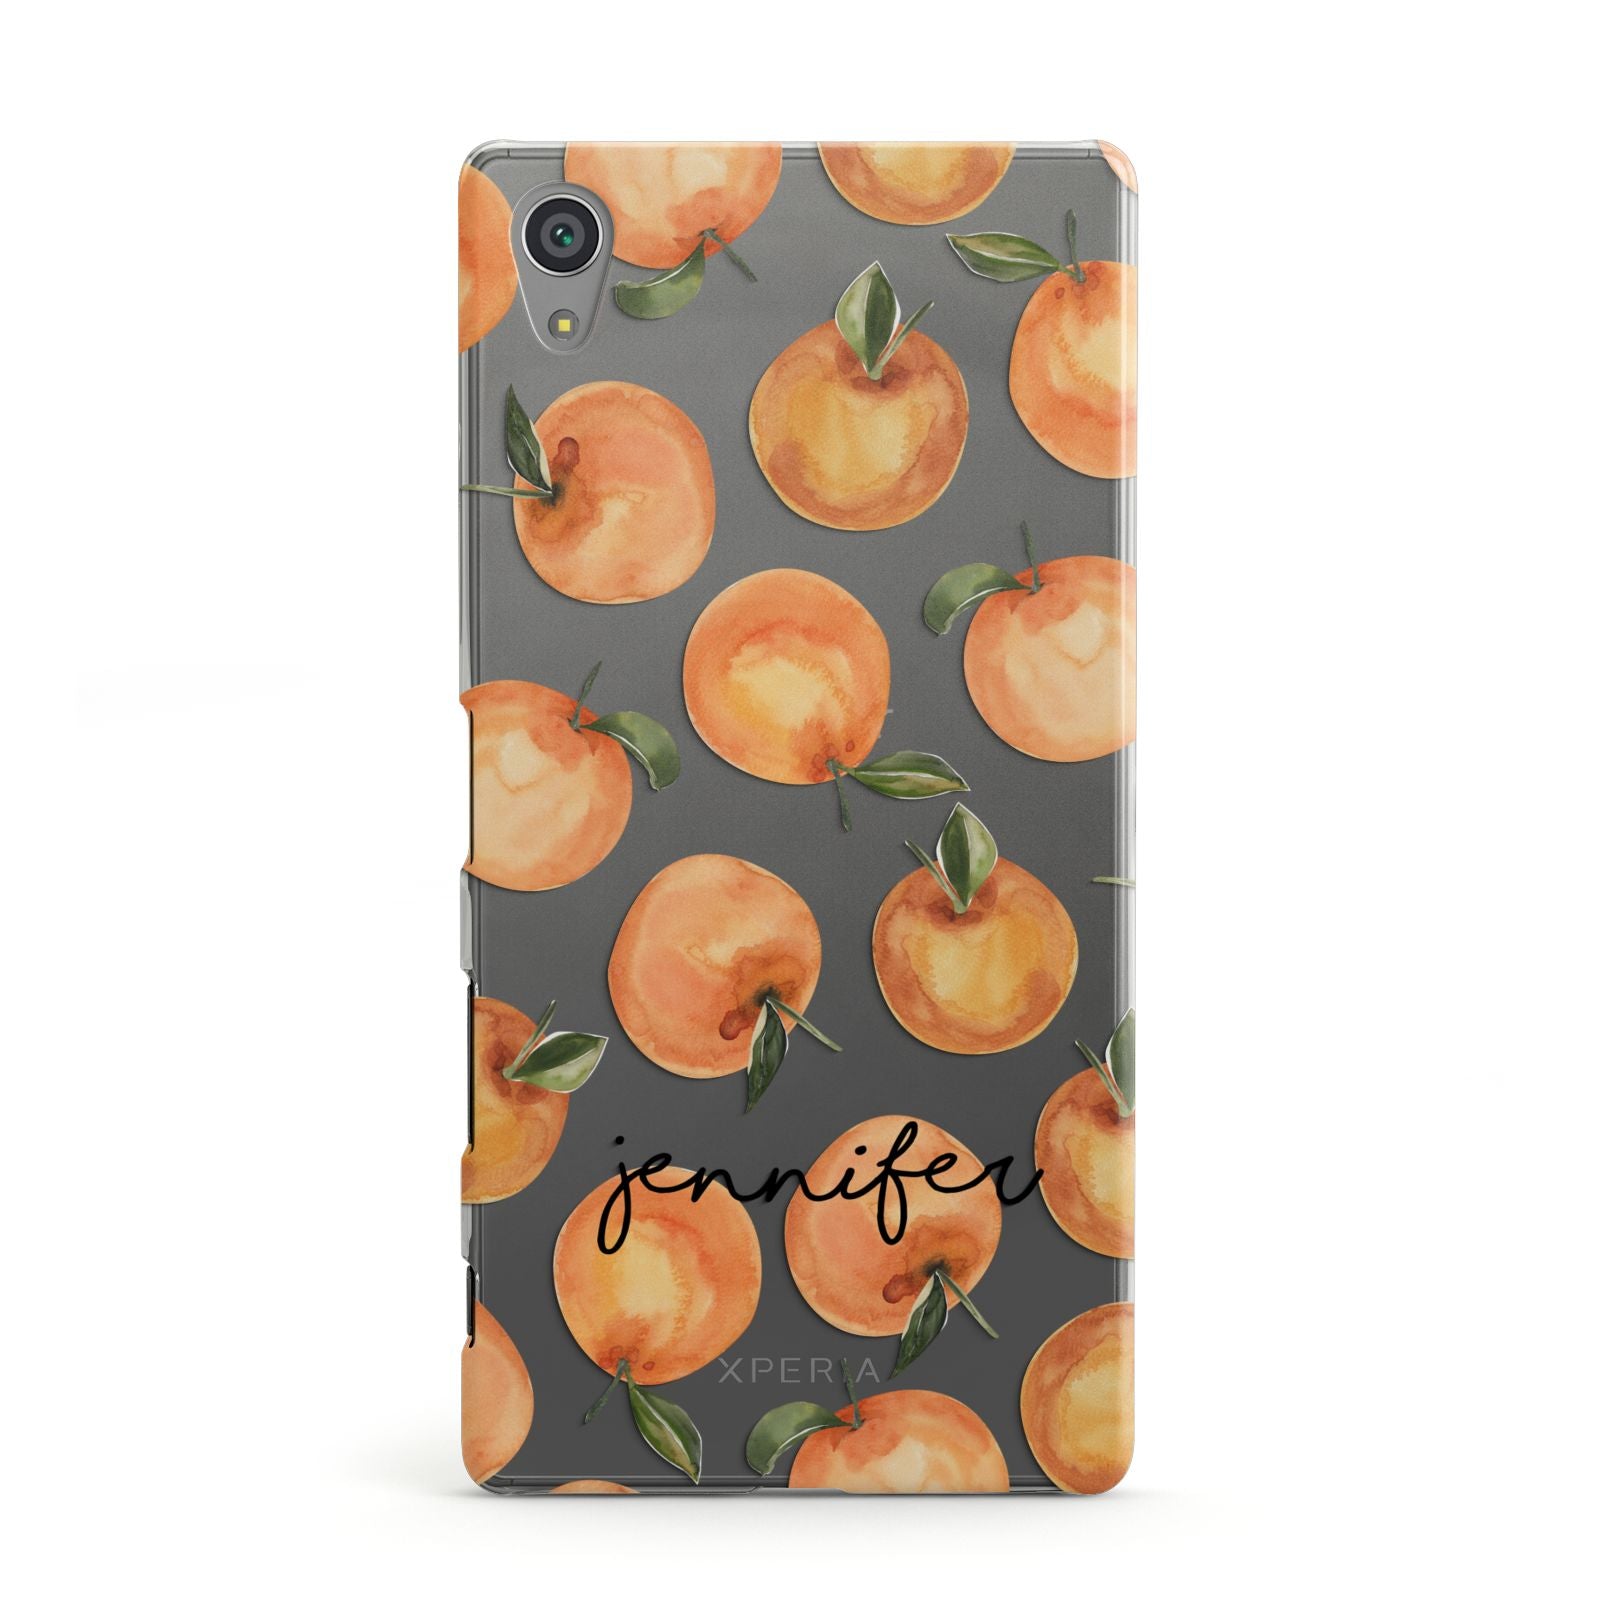 Personalised Oranges Name Sony Xperia Case